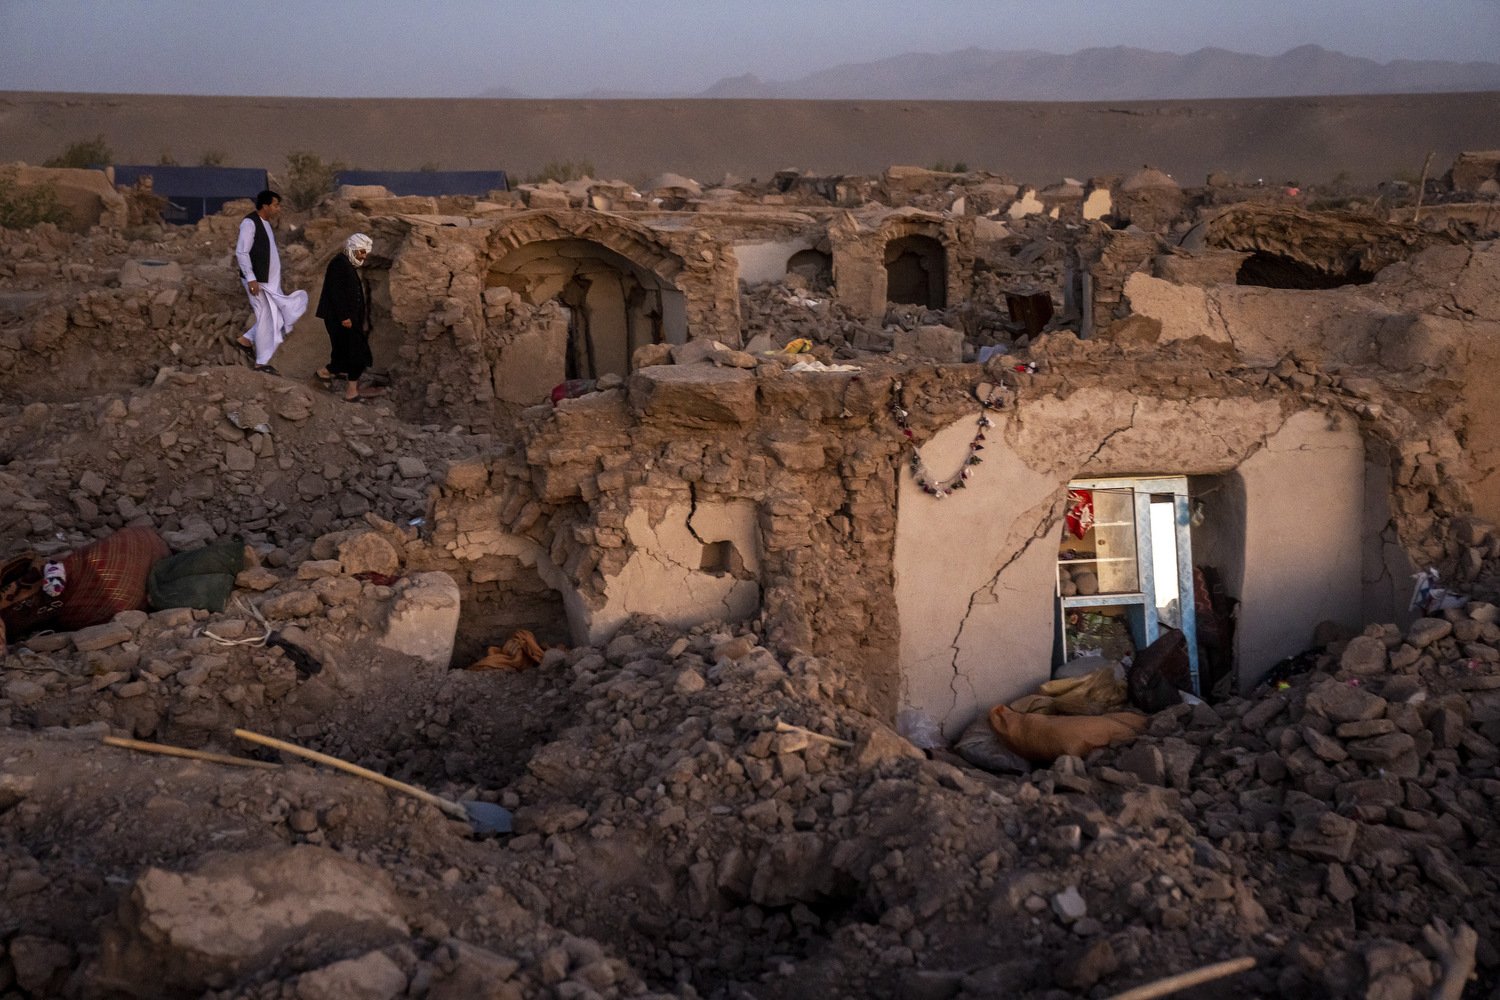  Afghan men search for victims after an earthquake in Zenda Jan district in Herat province, of western Afghanistan, Sunday, Oct. 8, 2023. Powerful earthquakes killed at least 2,000 people in western Afghanistan, a Taliban government spokesman said Su